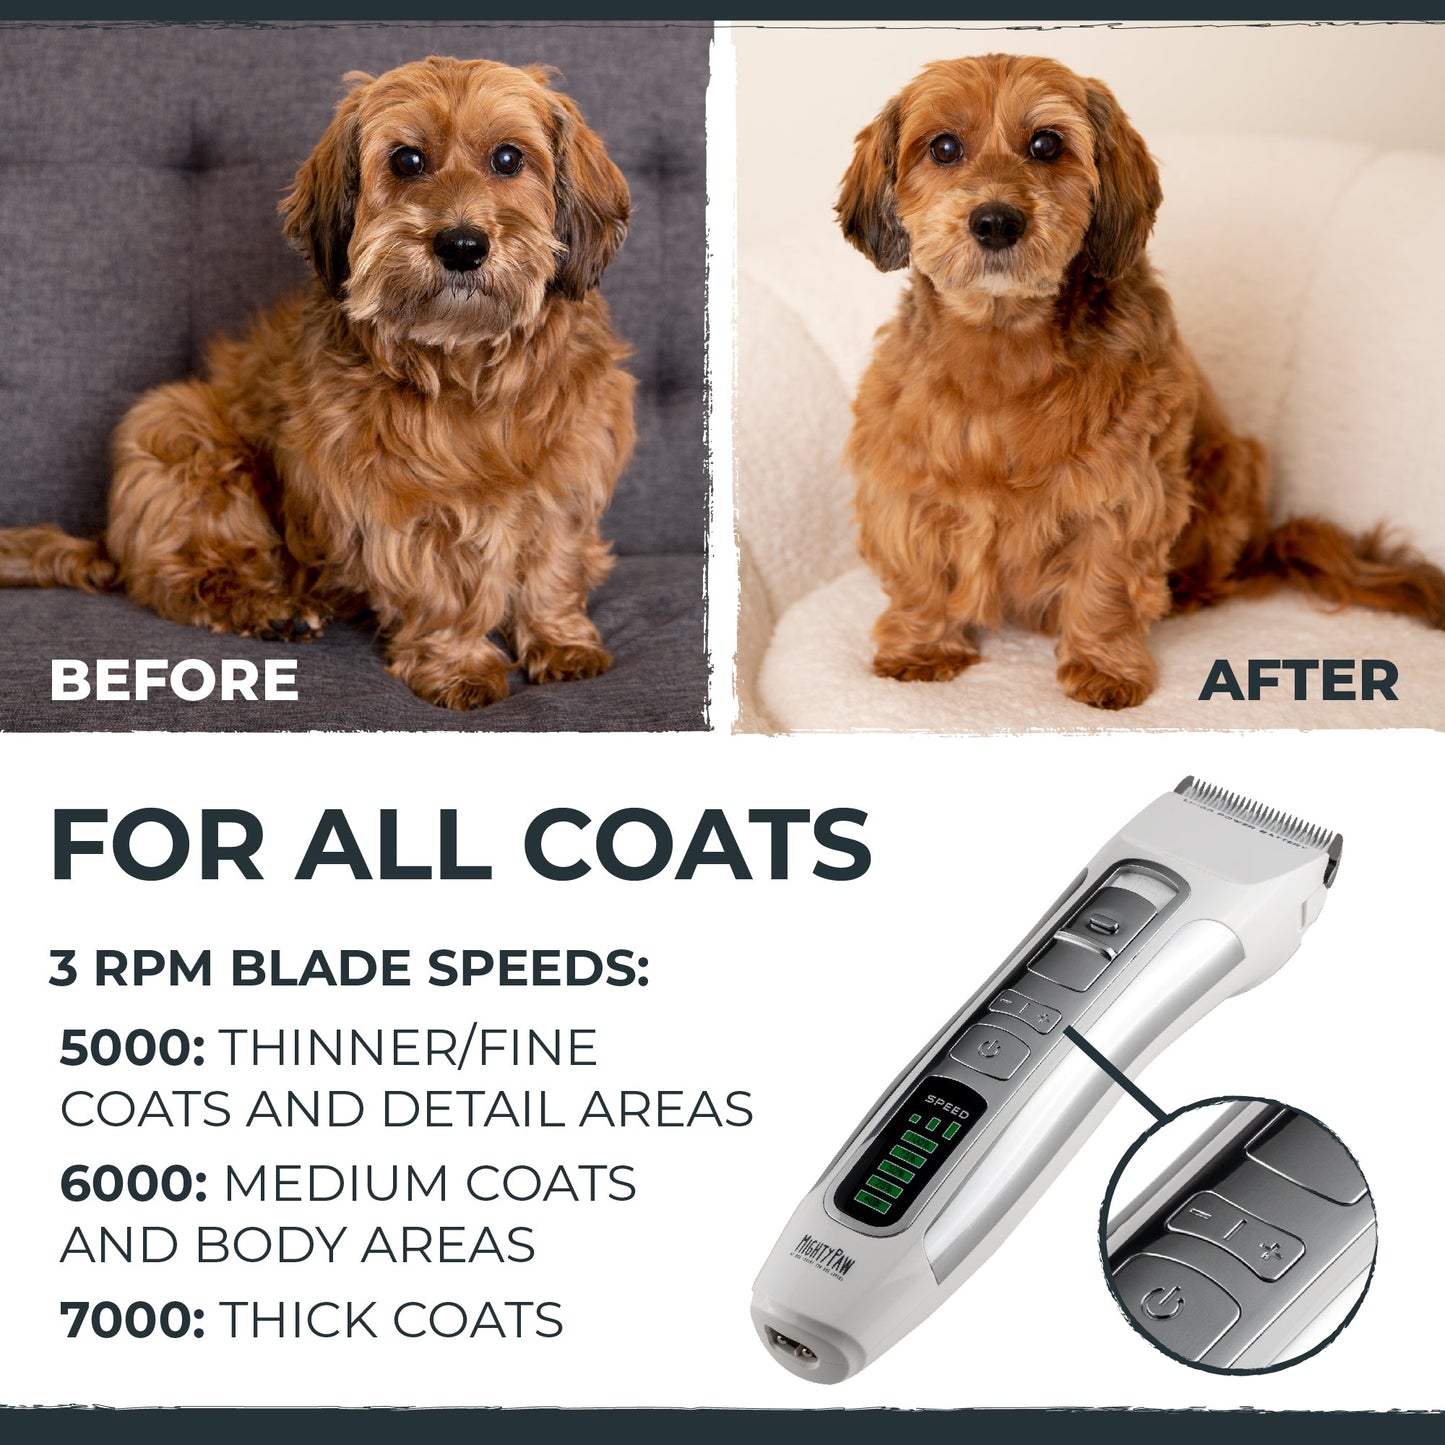 Professional Dog Grooming Clipper